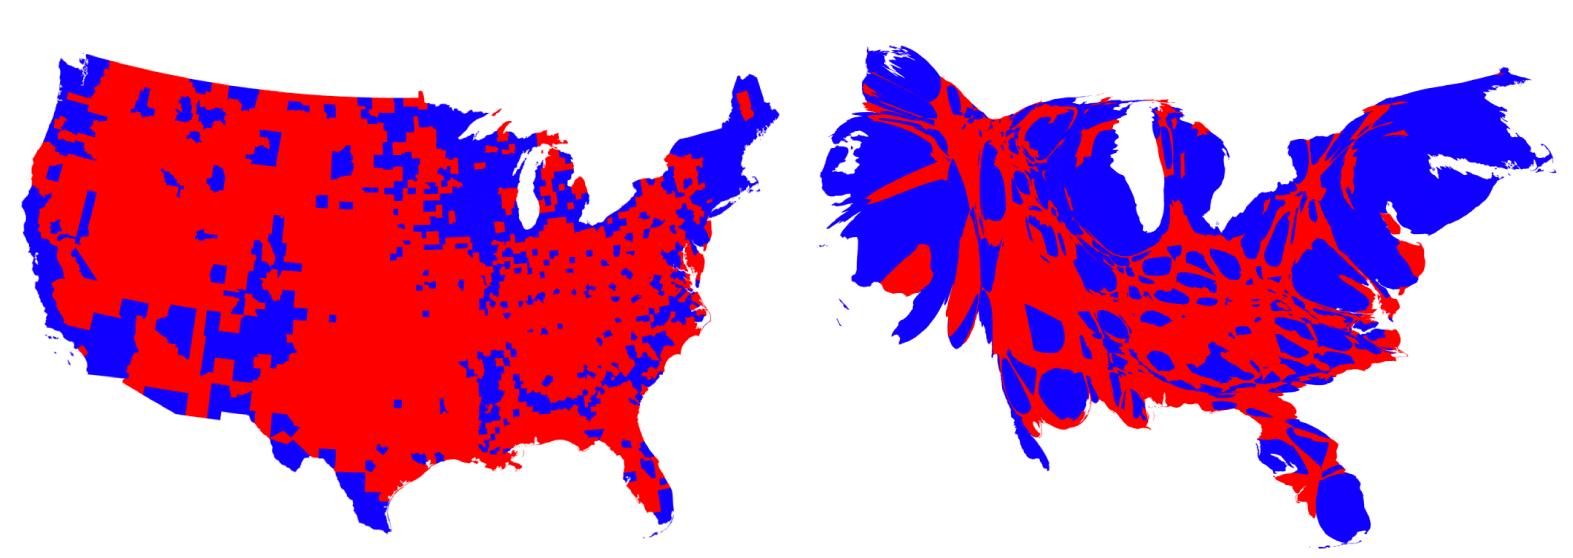 Election results by county. More in text above and caption.